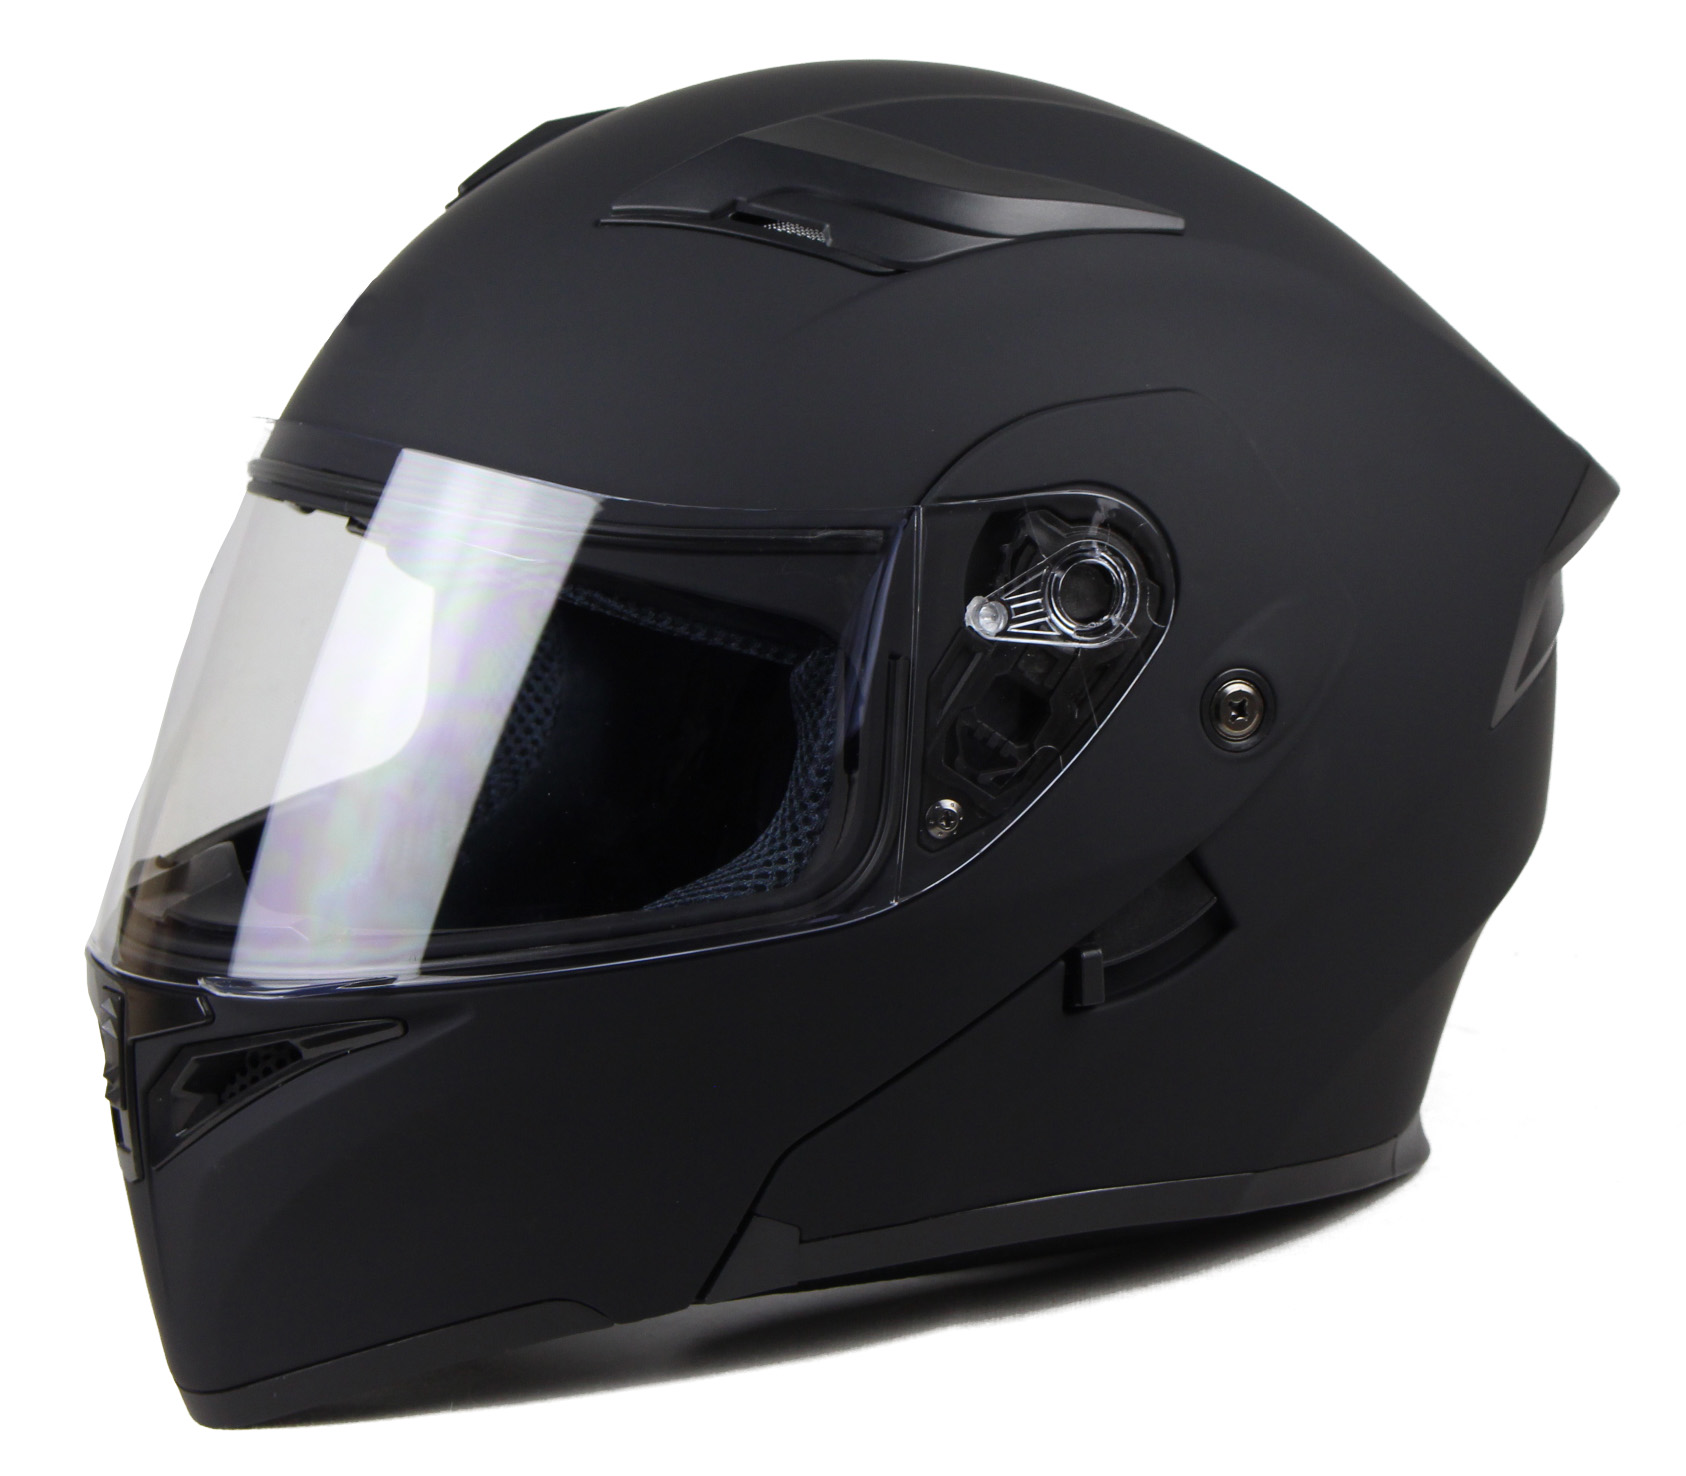 Top Open Face Crash Helmets for Safety and Style